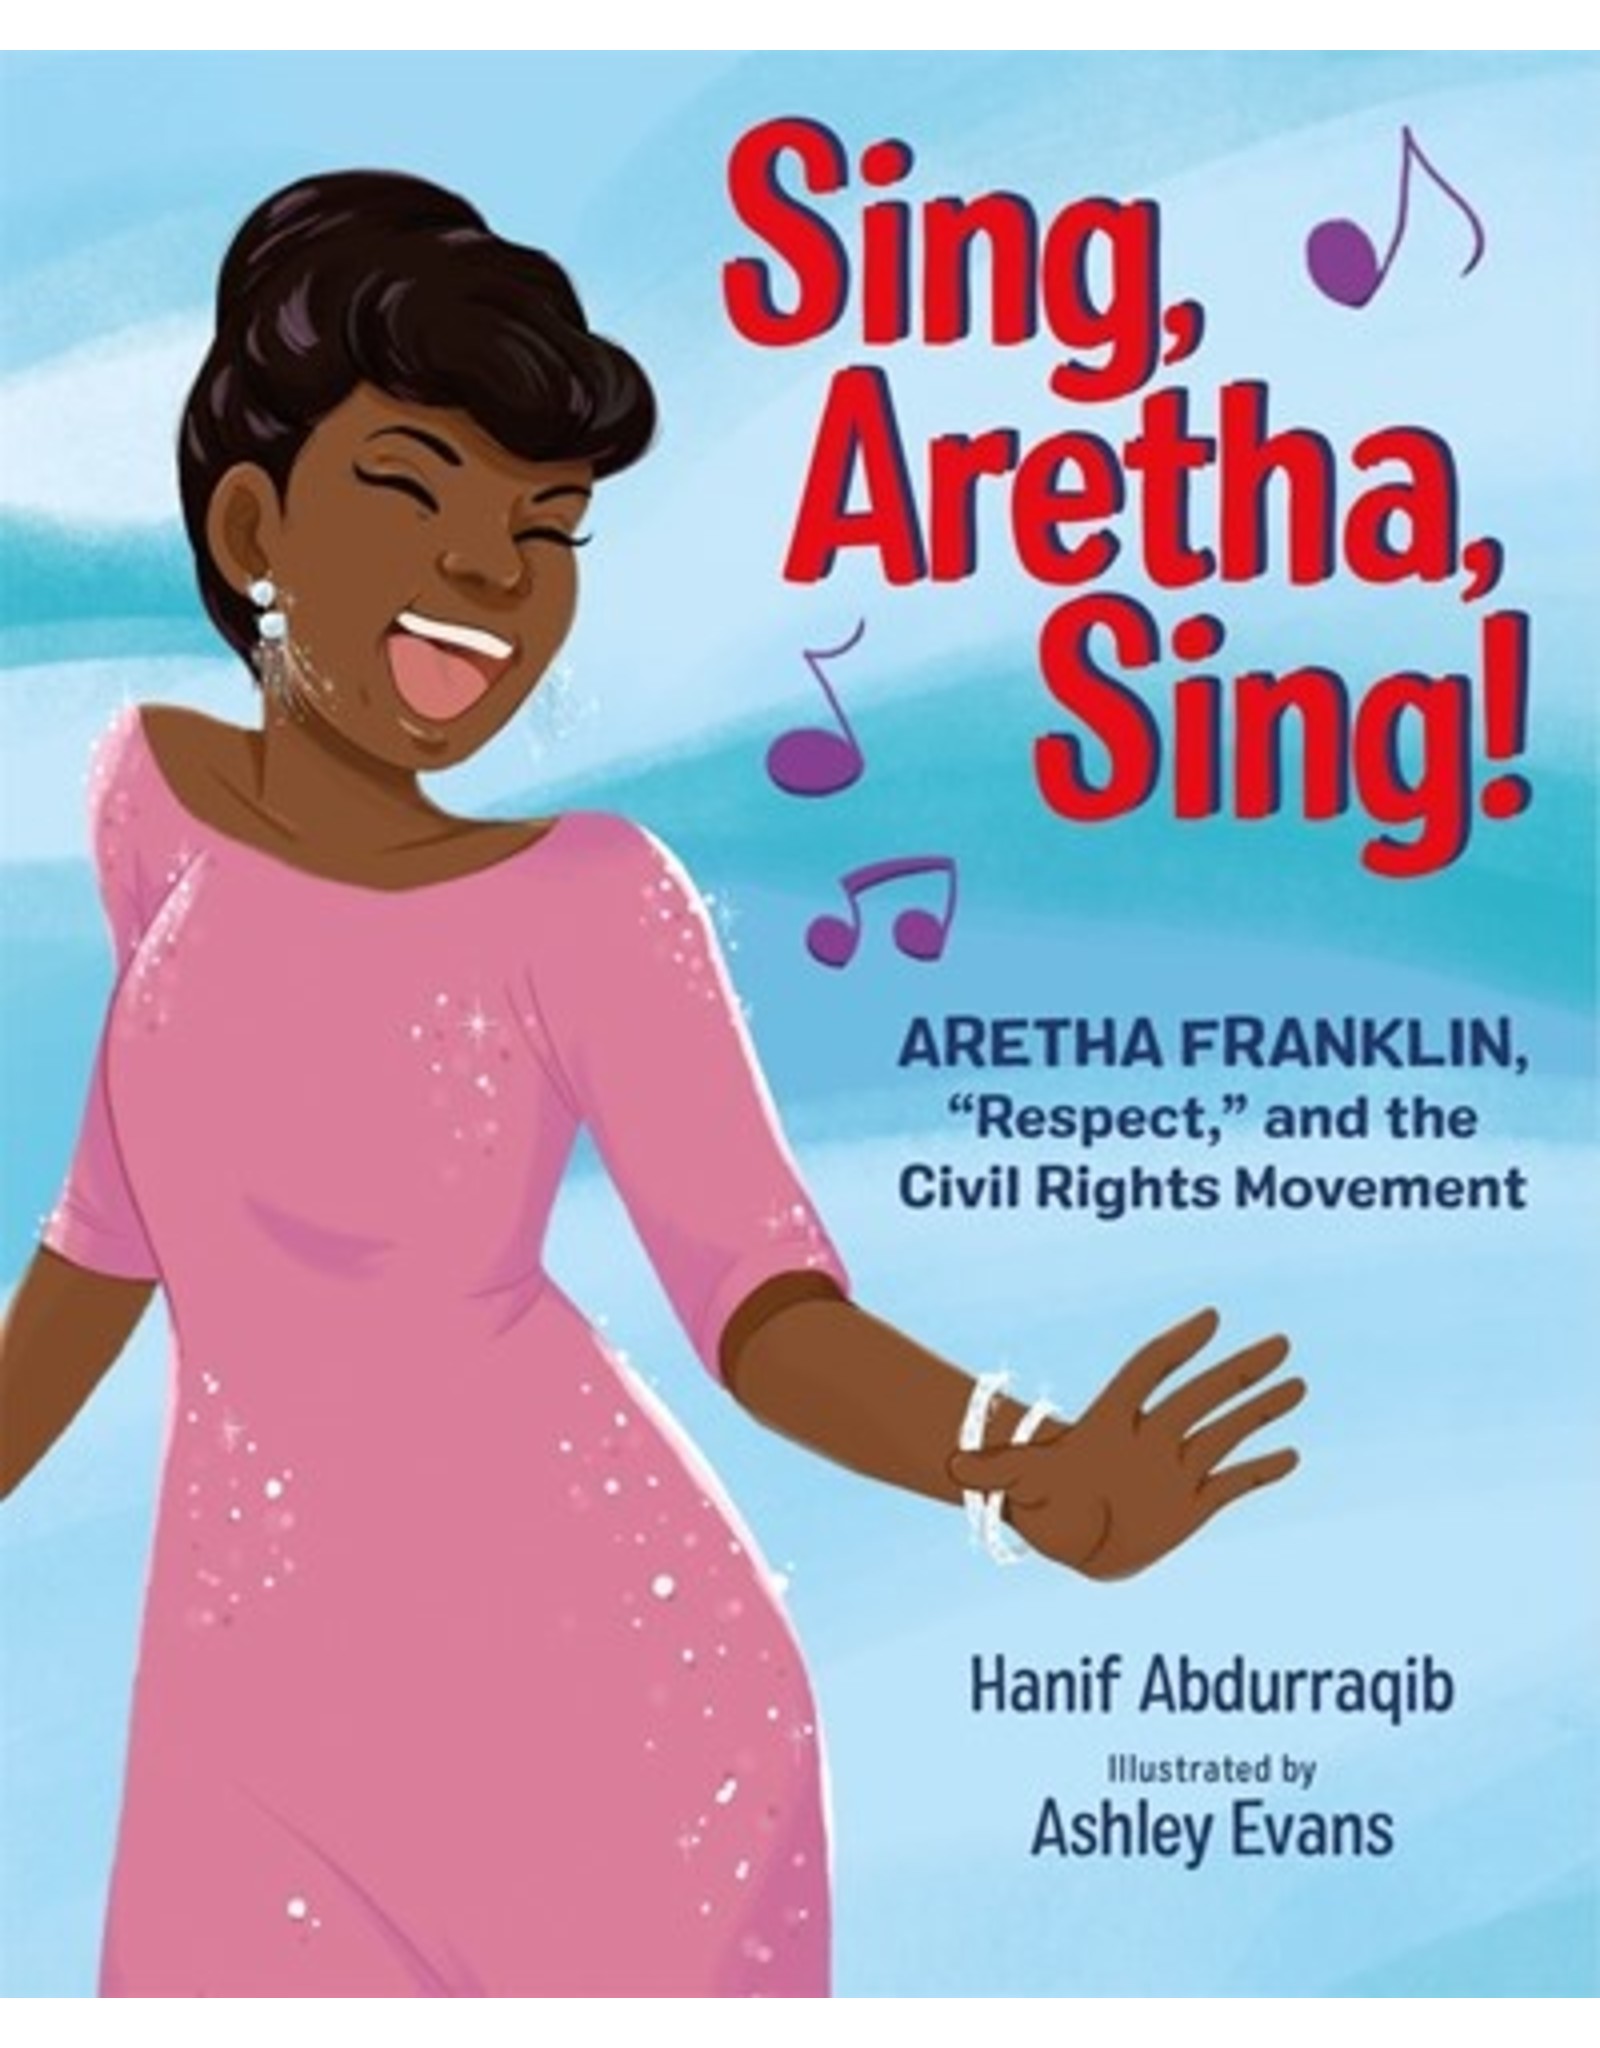 Books Sing, Aretha, Sing!  Aretha Franklin "Respect" and the Civil Rights Movement by Hanif Abdurraquib Illustrated by Ashley Evans (Griot)